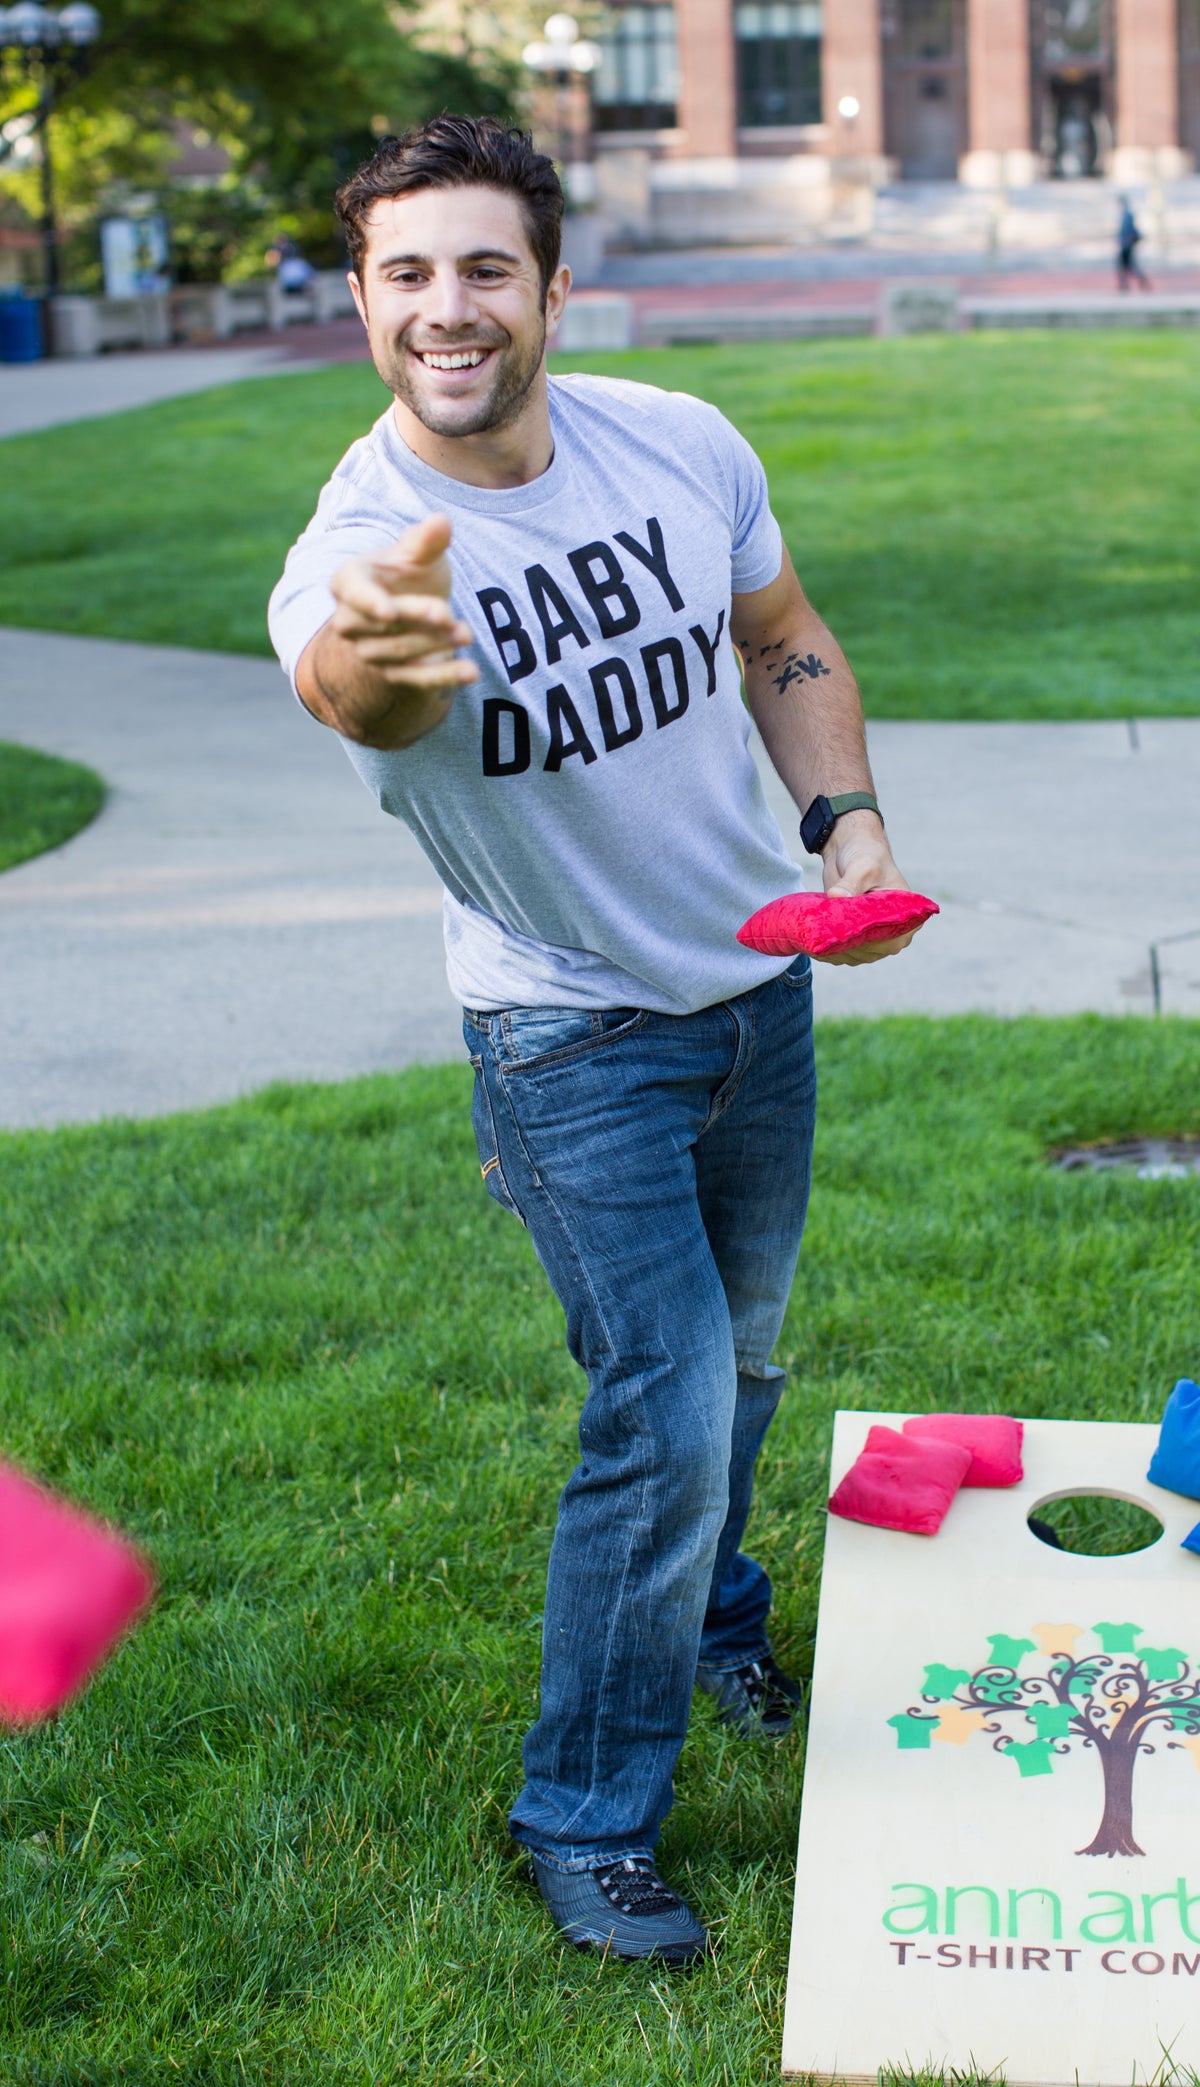 Baby Daddy - Funny New Father, Father's Day Dad Gift Humor T-shirt for Men